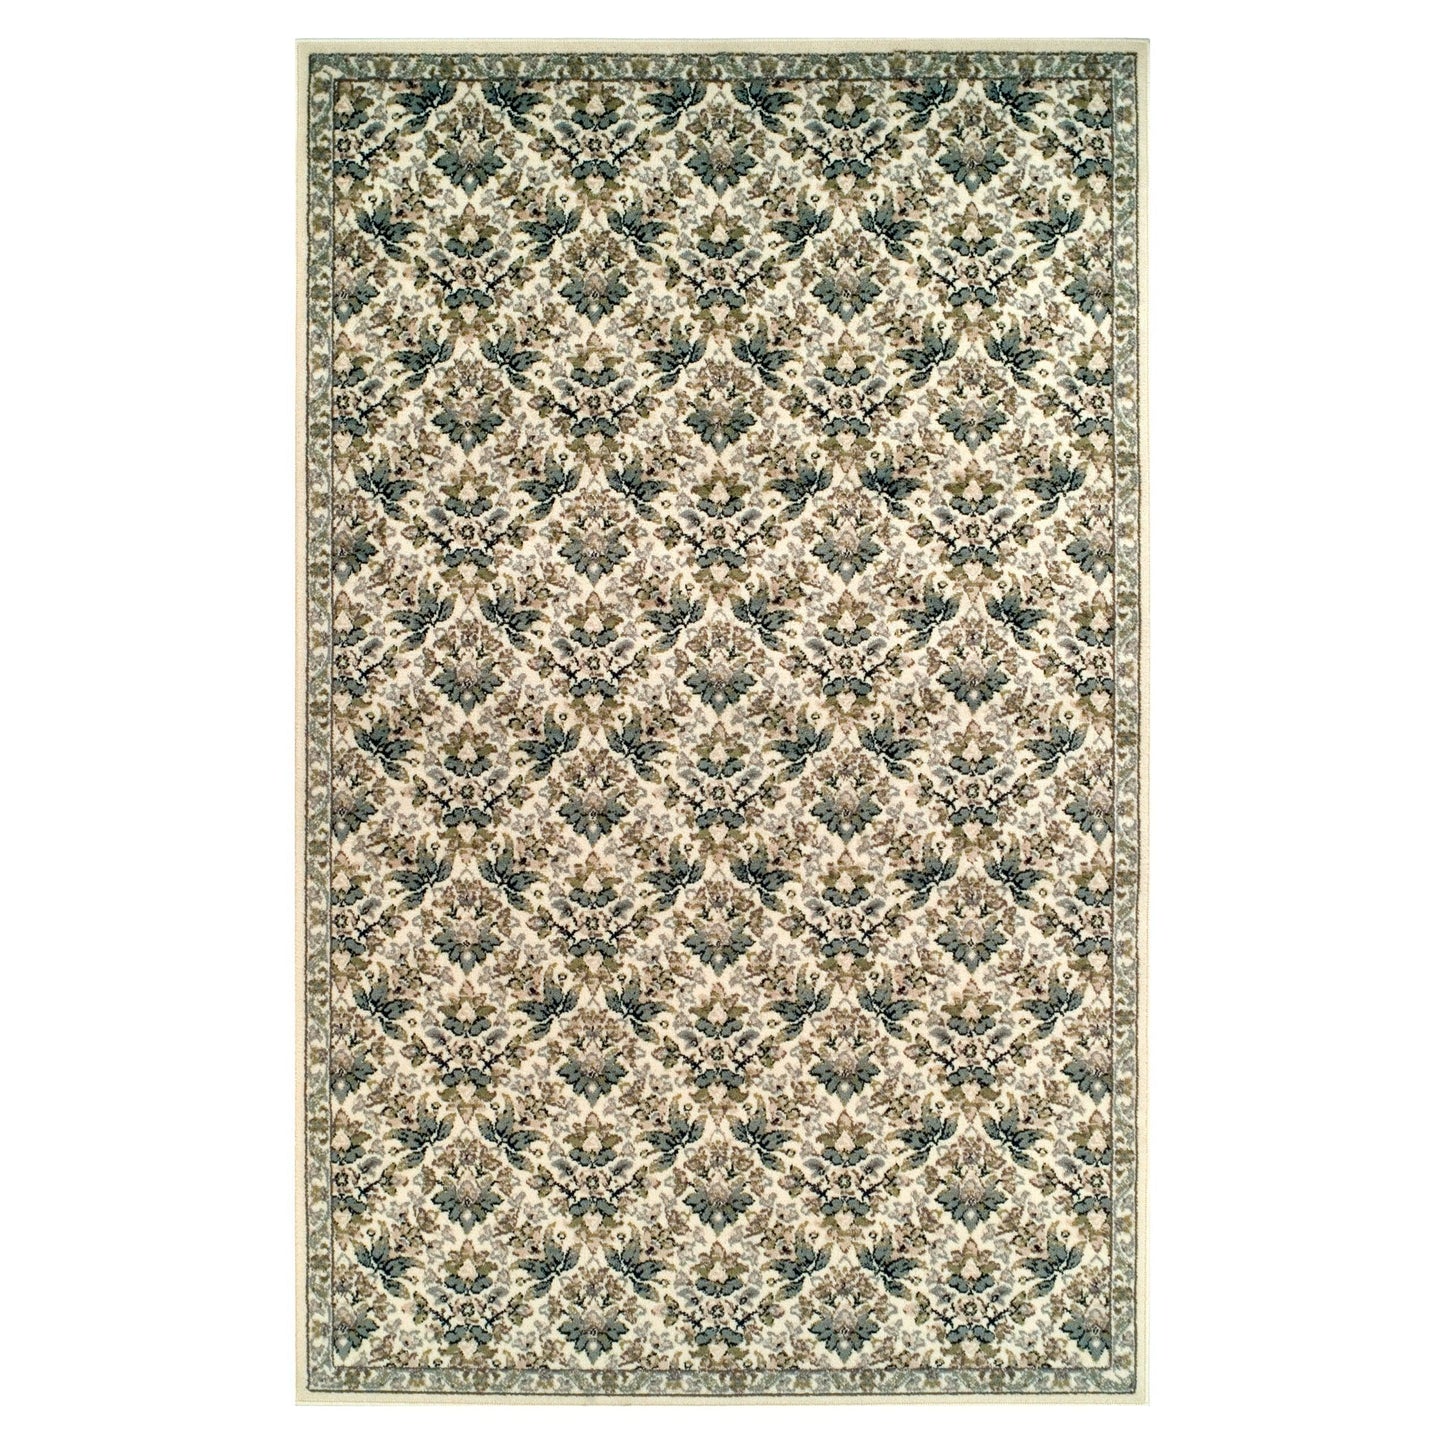 Madeleine Oriental Contemporary Floral Damask Rug FredCo